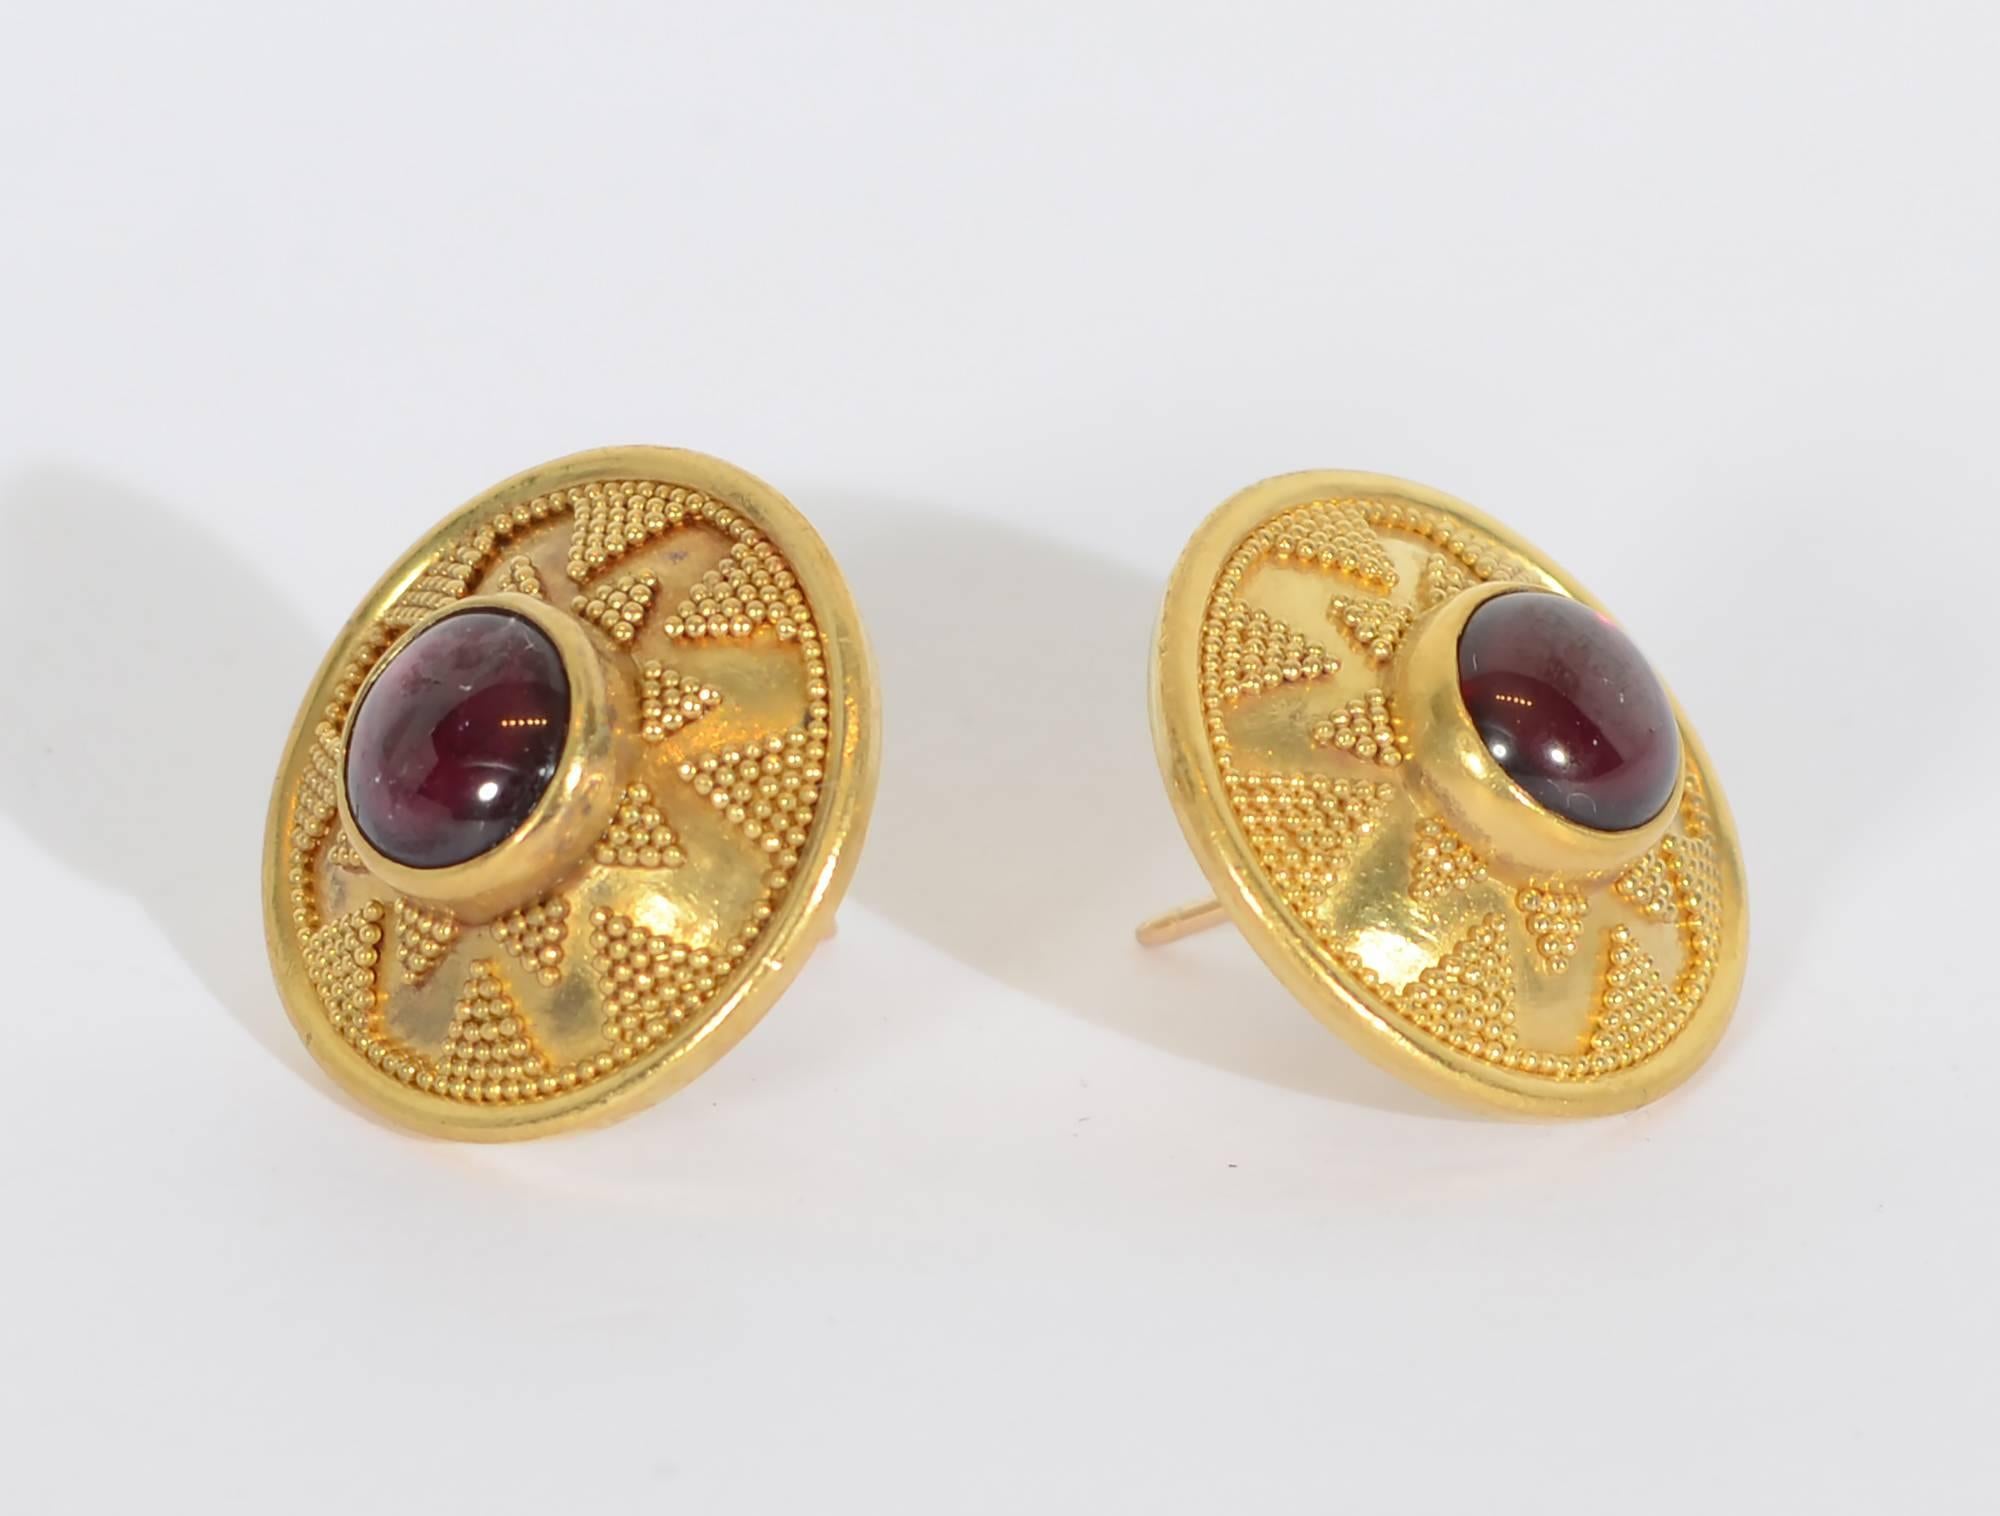 These ear studs demonstrate the finest of Etruscan gold work. Central cabochon garnets are the center of a star like design comprised of tiny, tiny balls. The earrings are 3/4